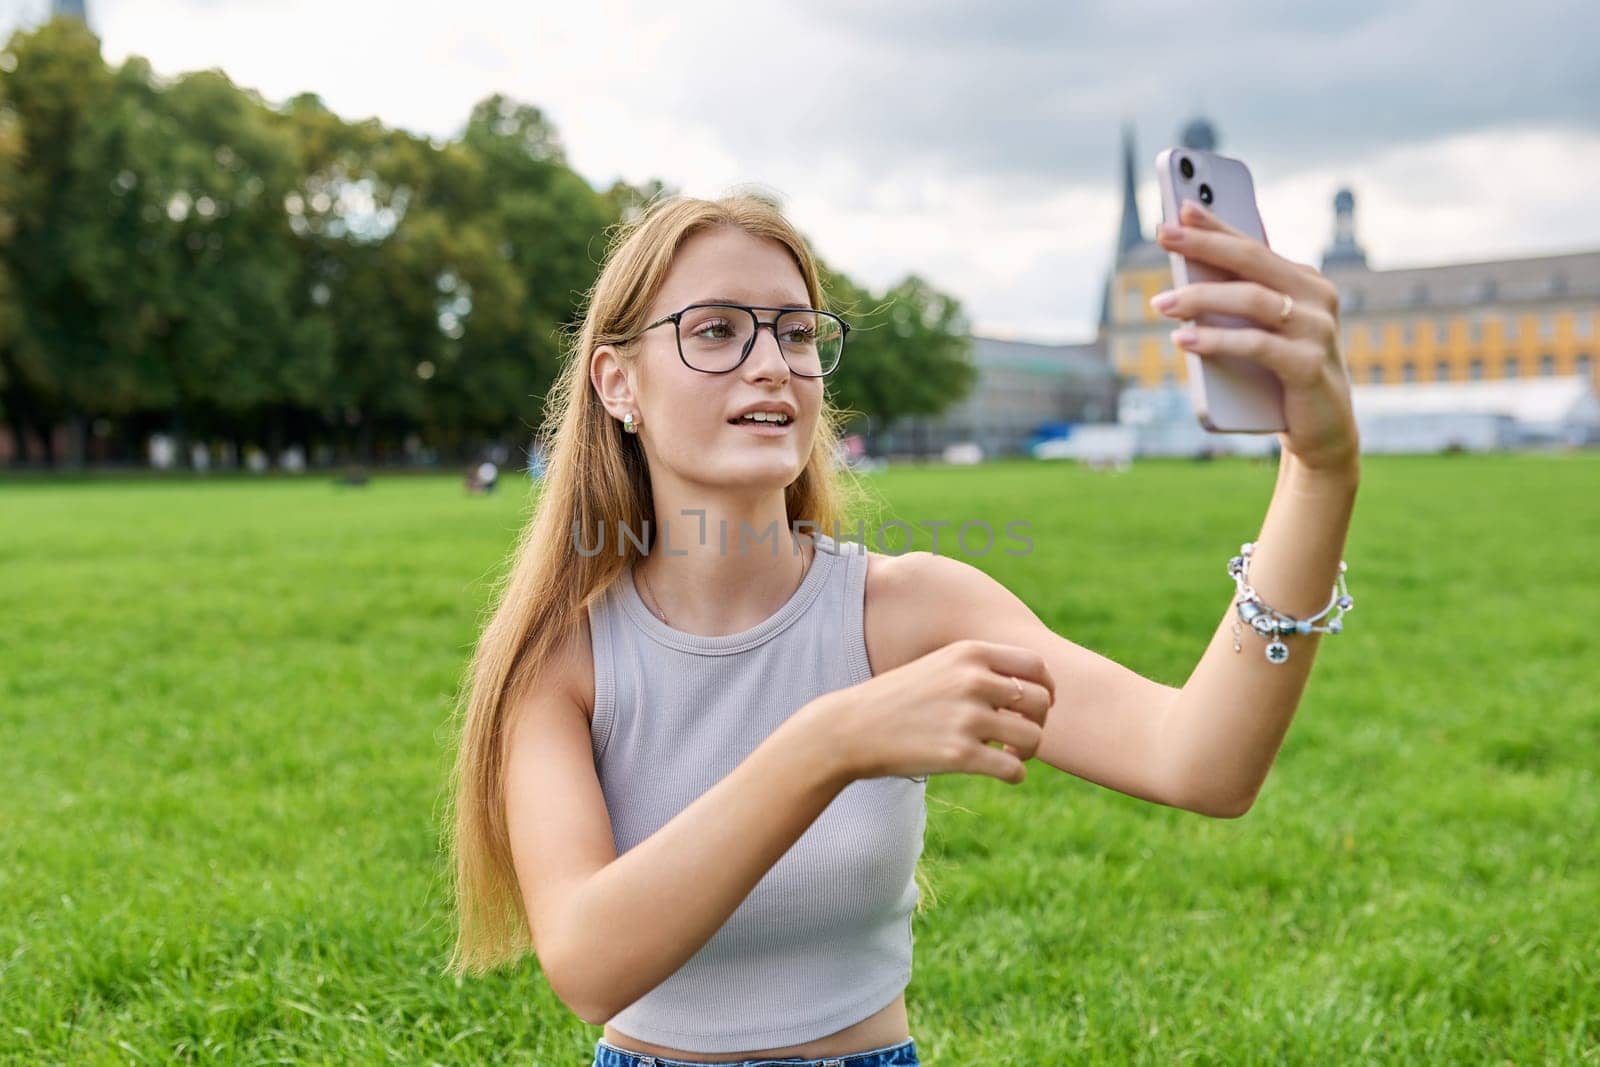 Teenage girl student having video call on smartphone, resting sitting on grass lawn near university building. Technology, leisure, communication, youth